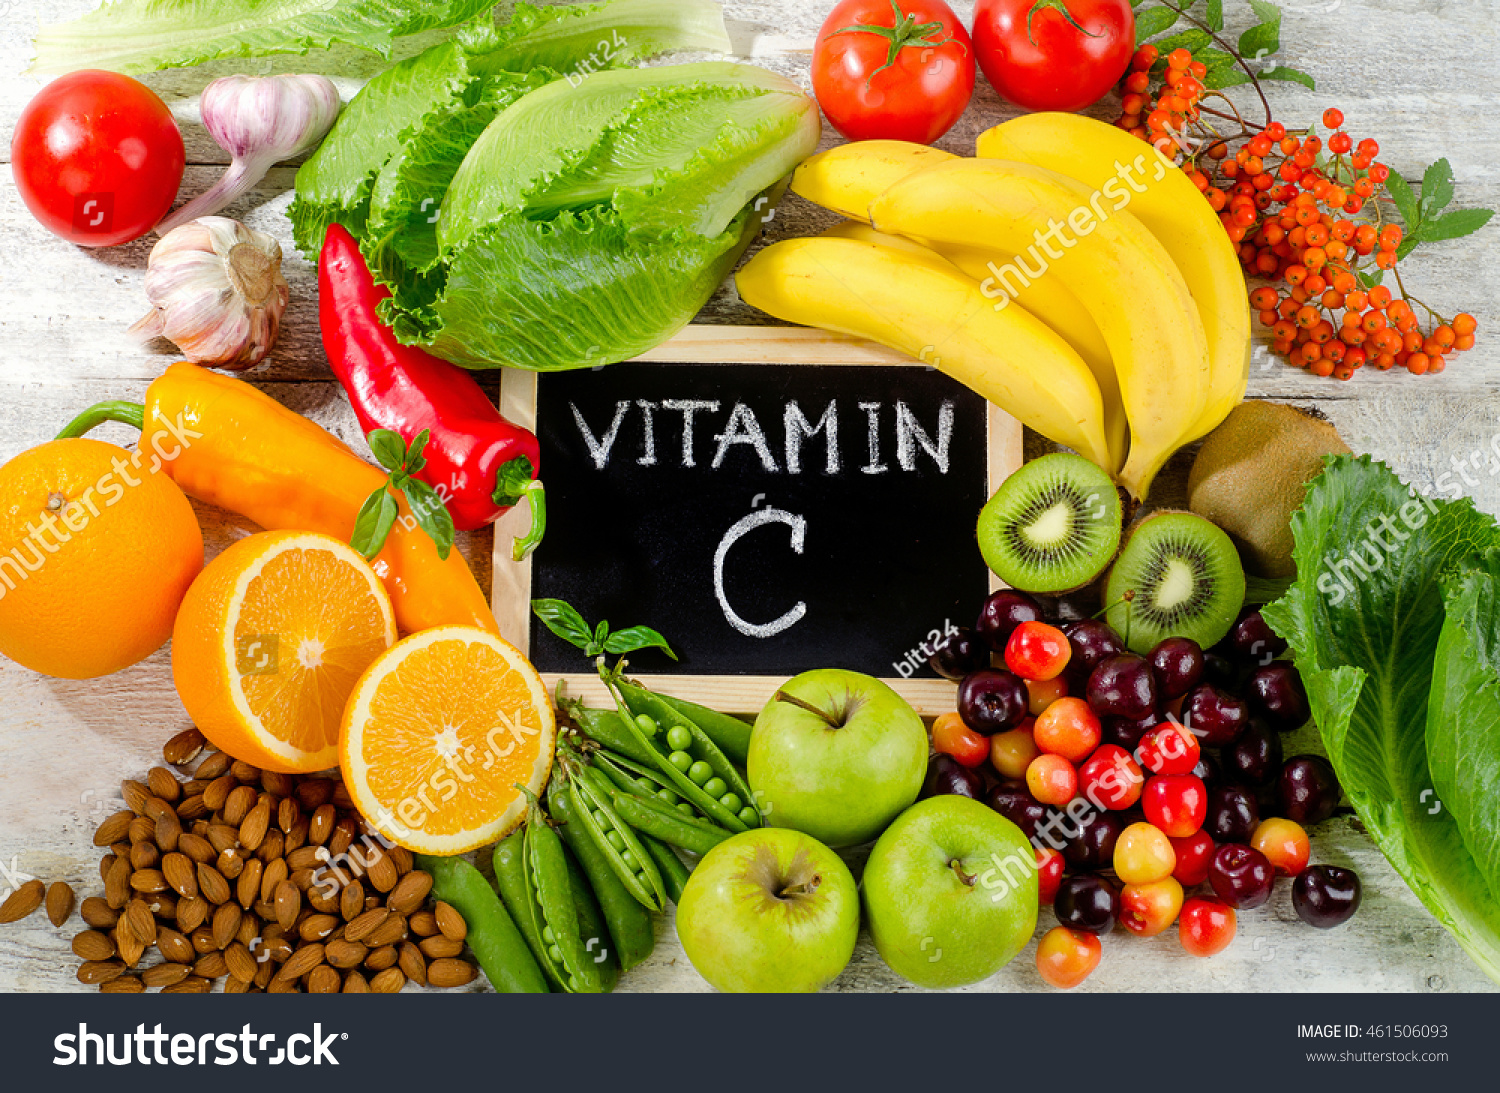 Foods High in vitamin C on a wooden board.  Healthy eating. Top view #461506093